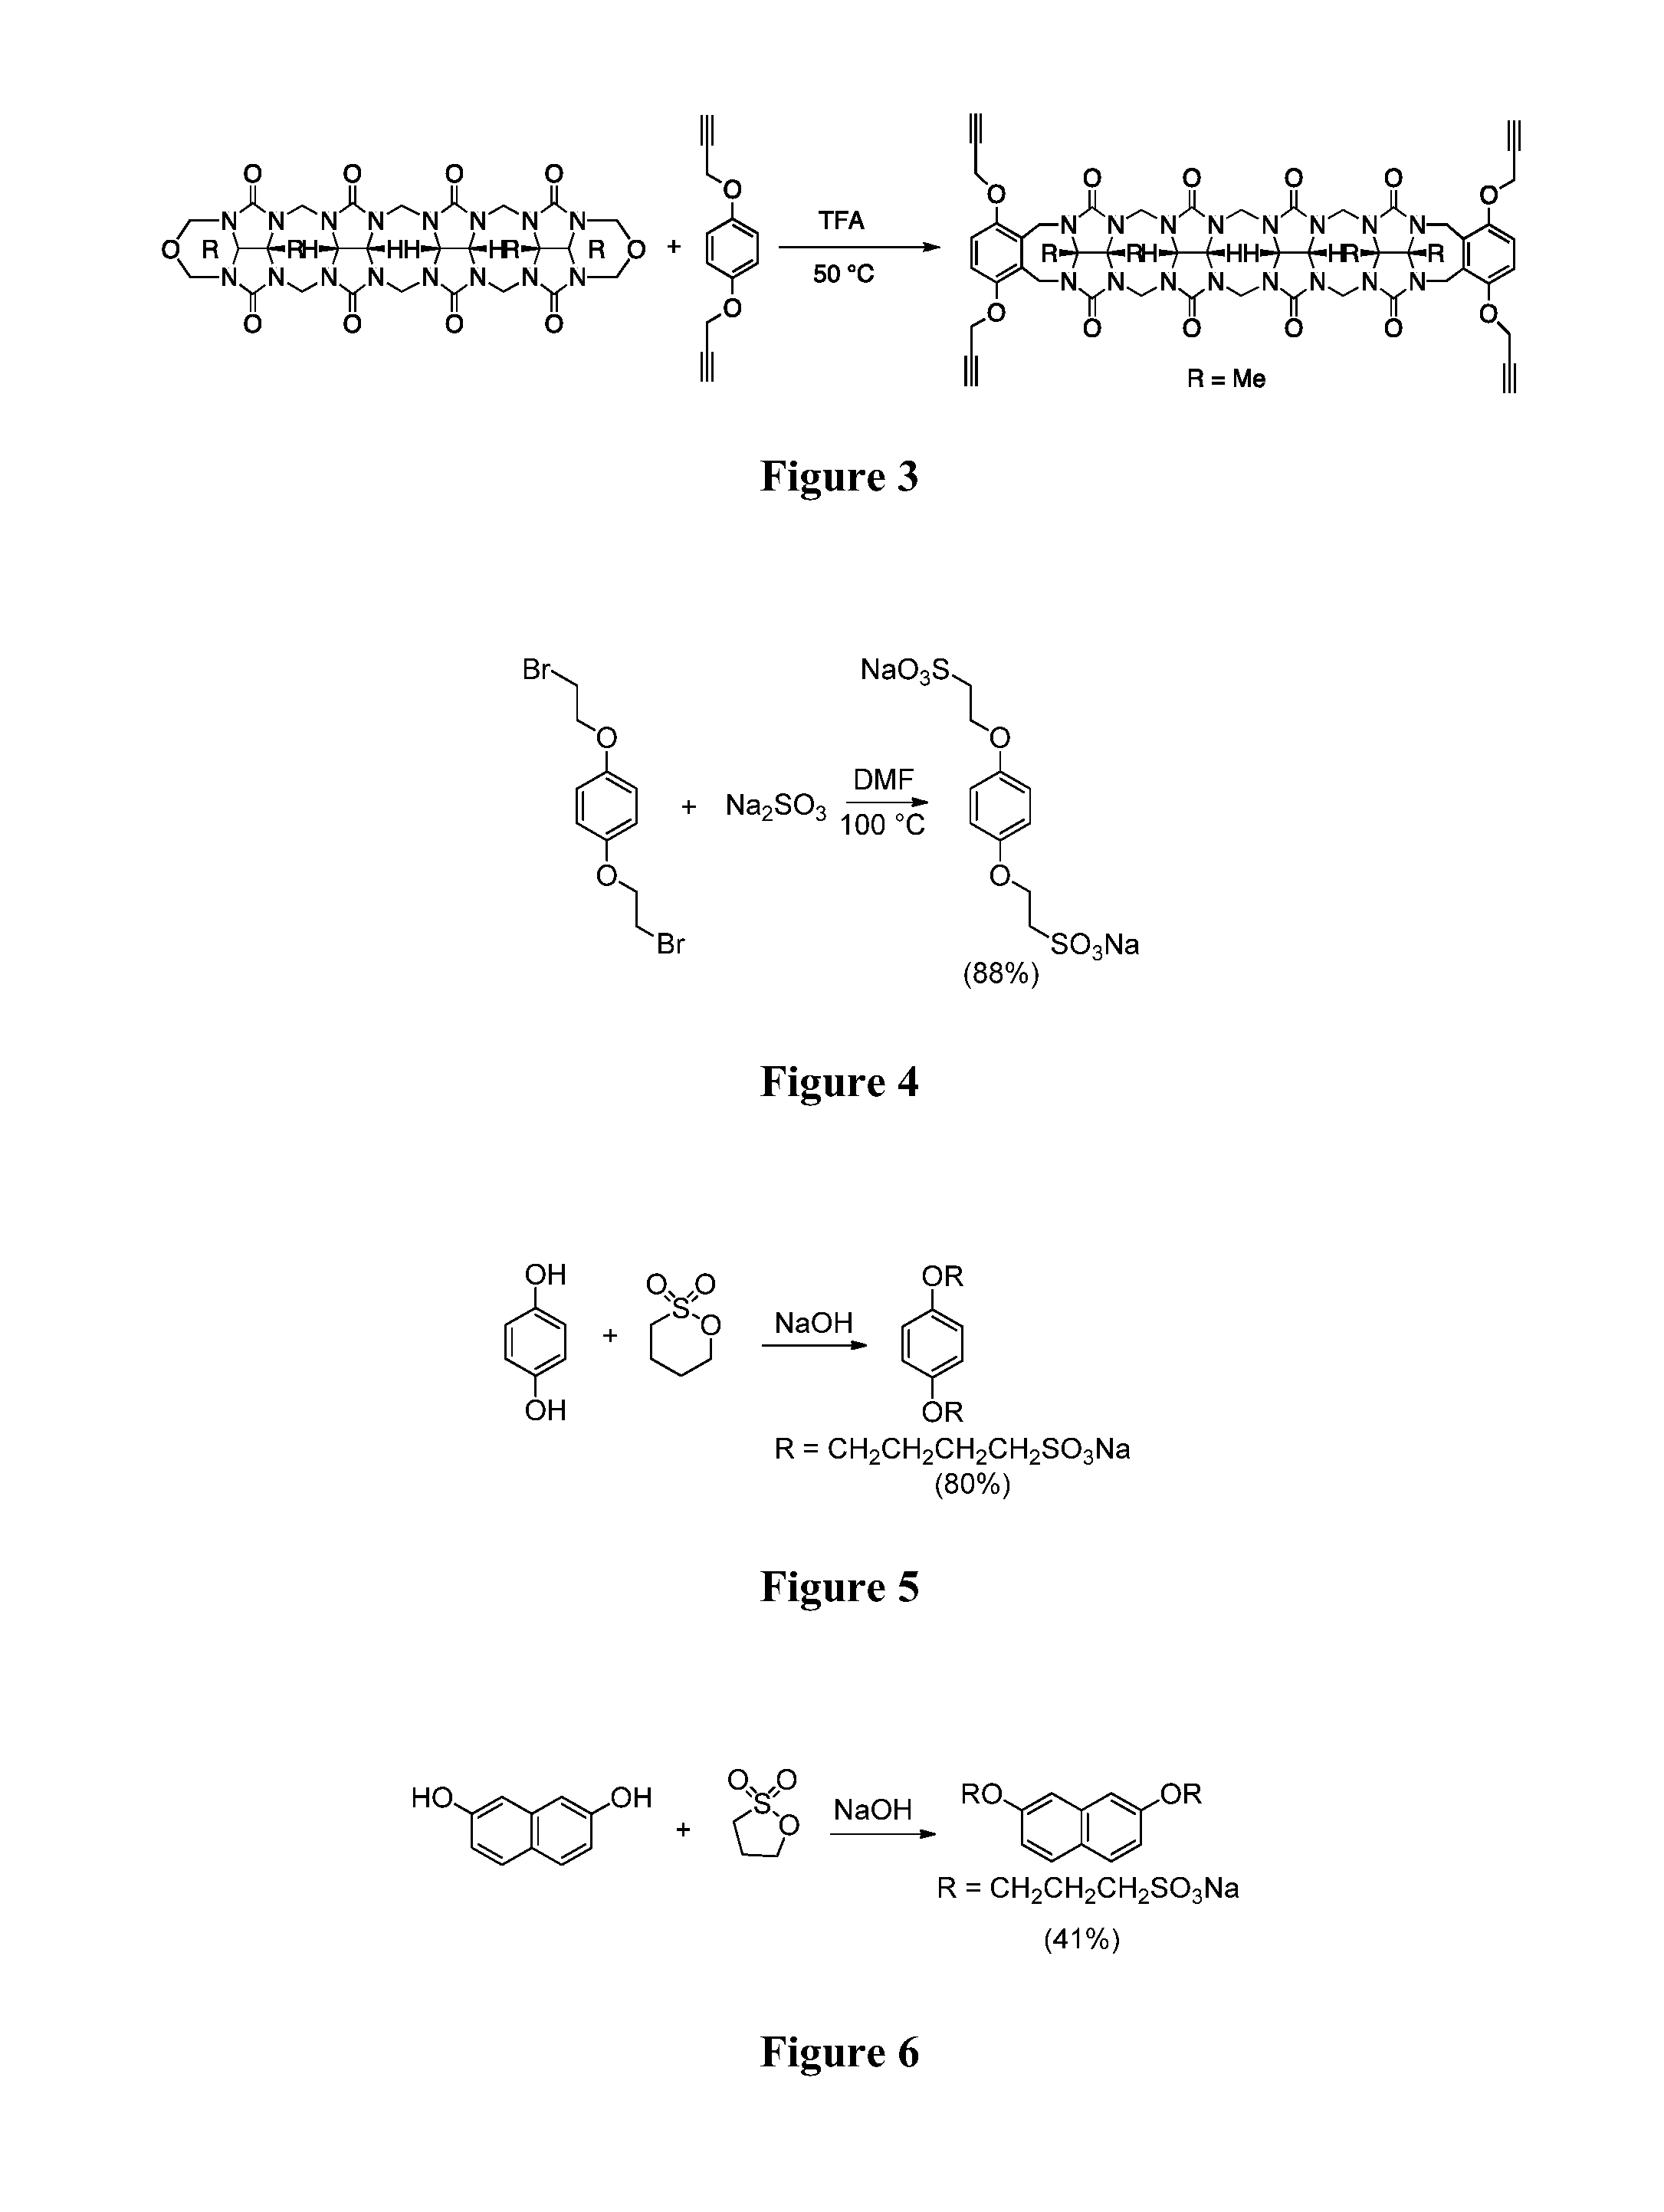 Molecular containers and methods of making and using same